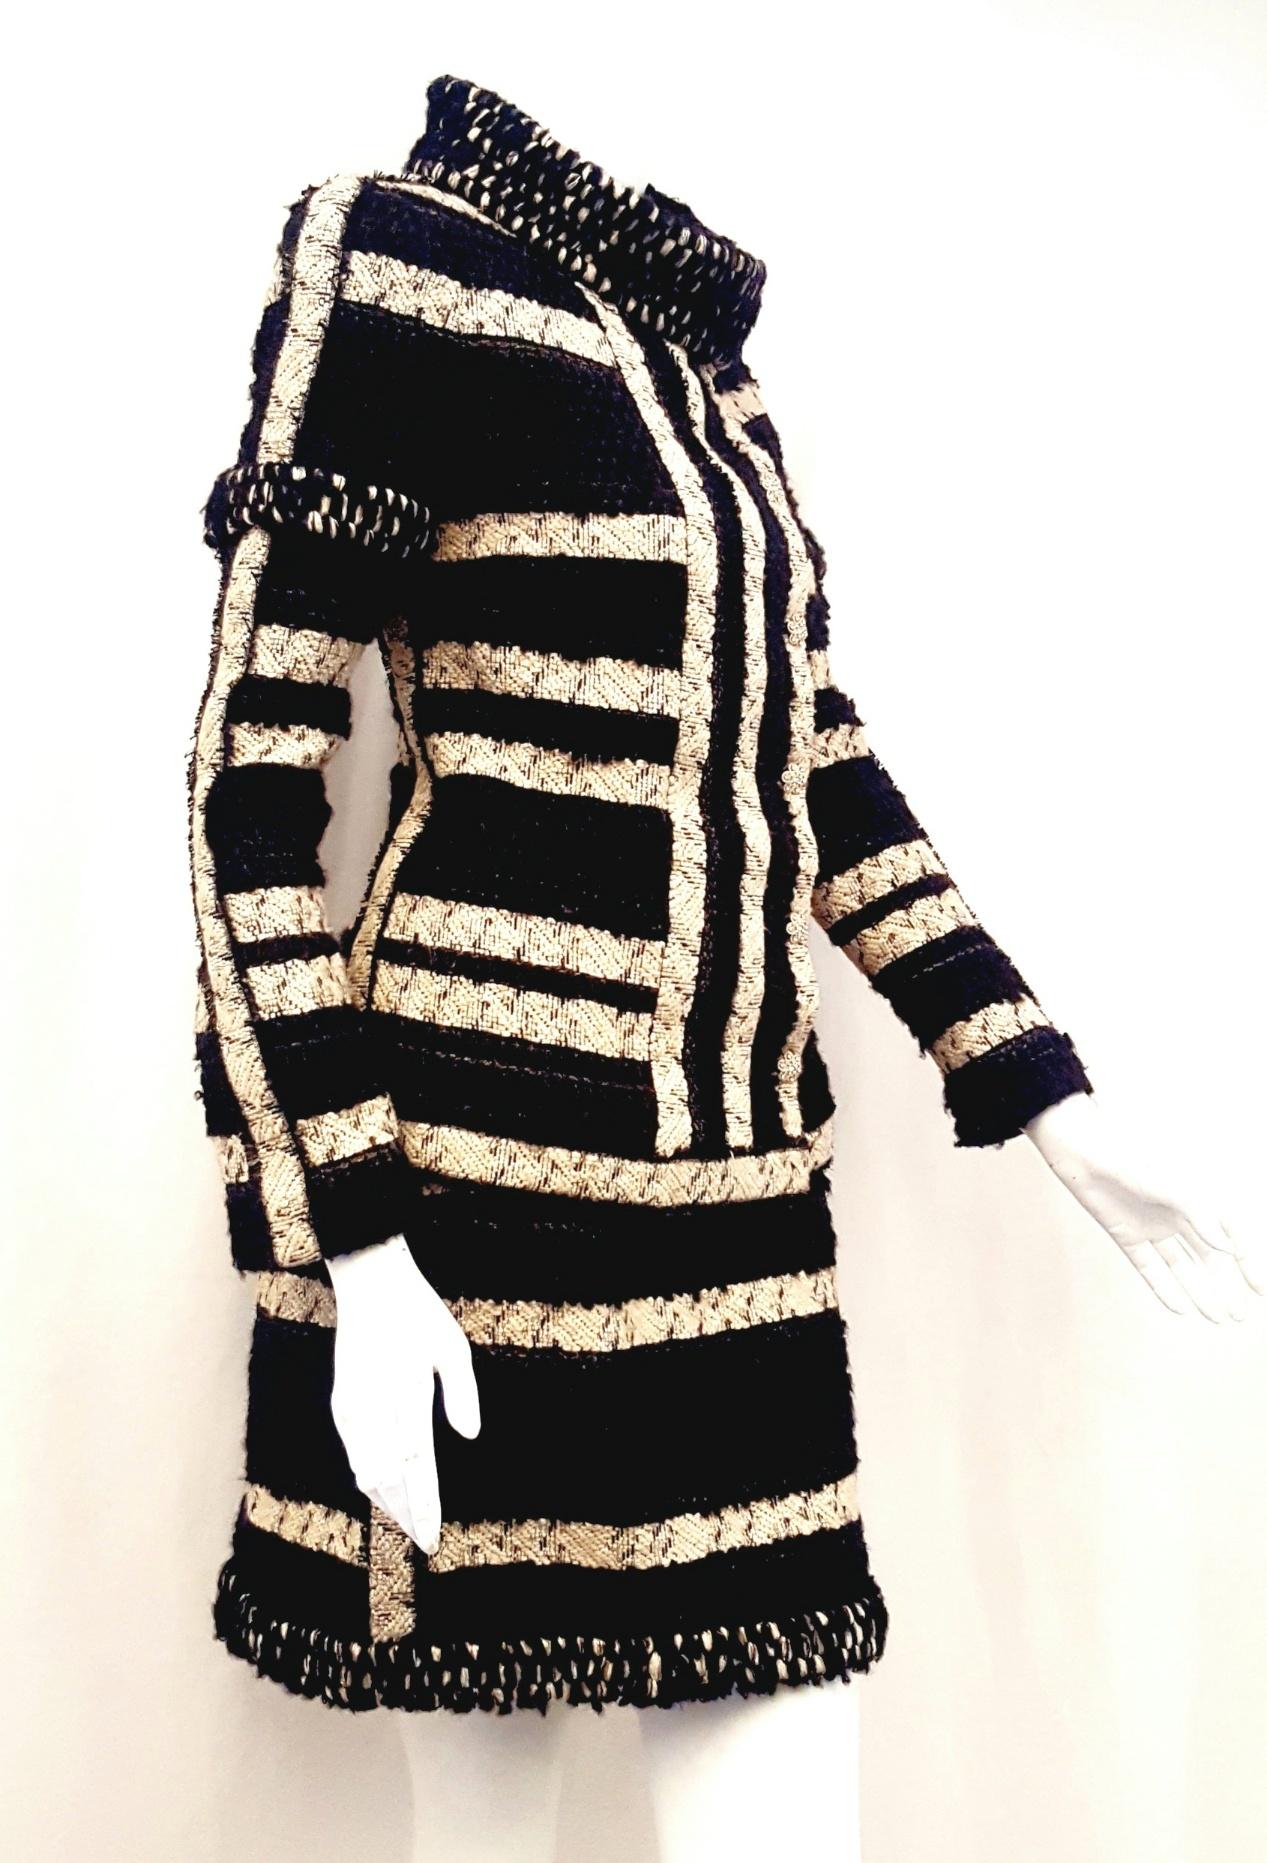 Chanel black and beige stripe design suit contains metallic black and gold tone threads throughout and combined with the mohair it adds texture and glam to this Autumn 2009 ensemble.  This classic fantasy tweed suit has an amazing collar, the royal